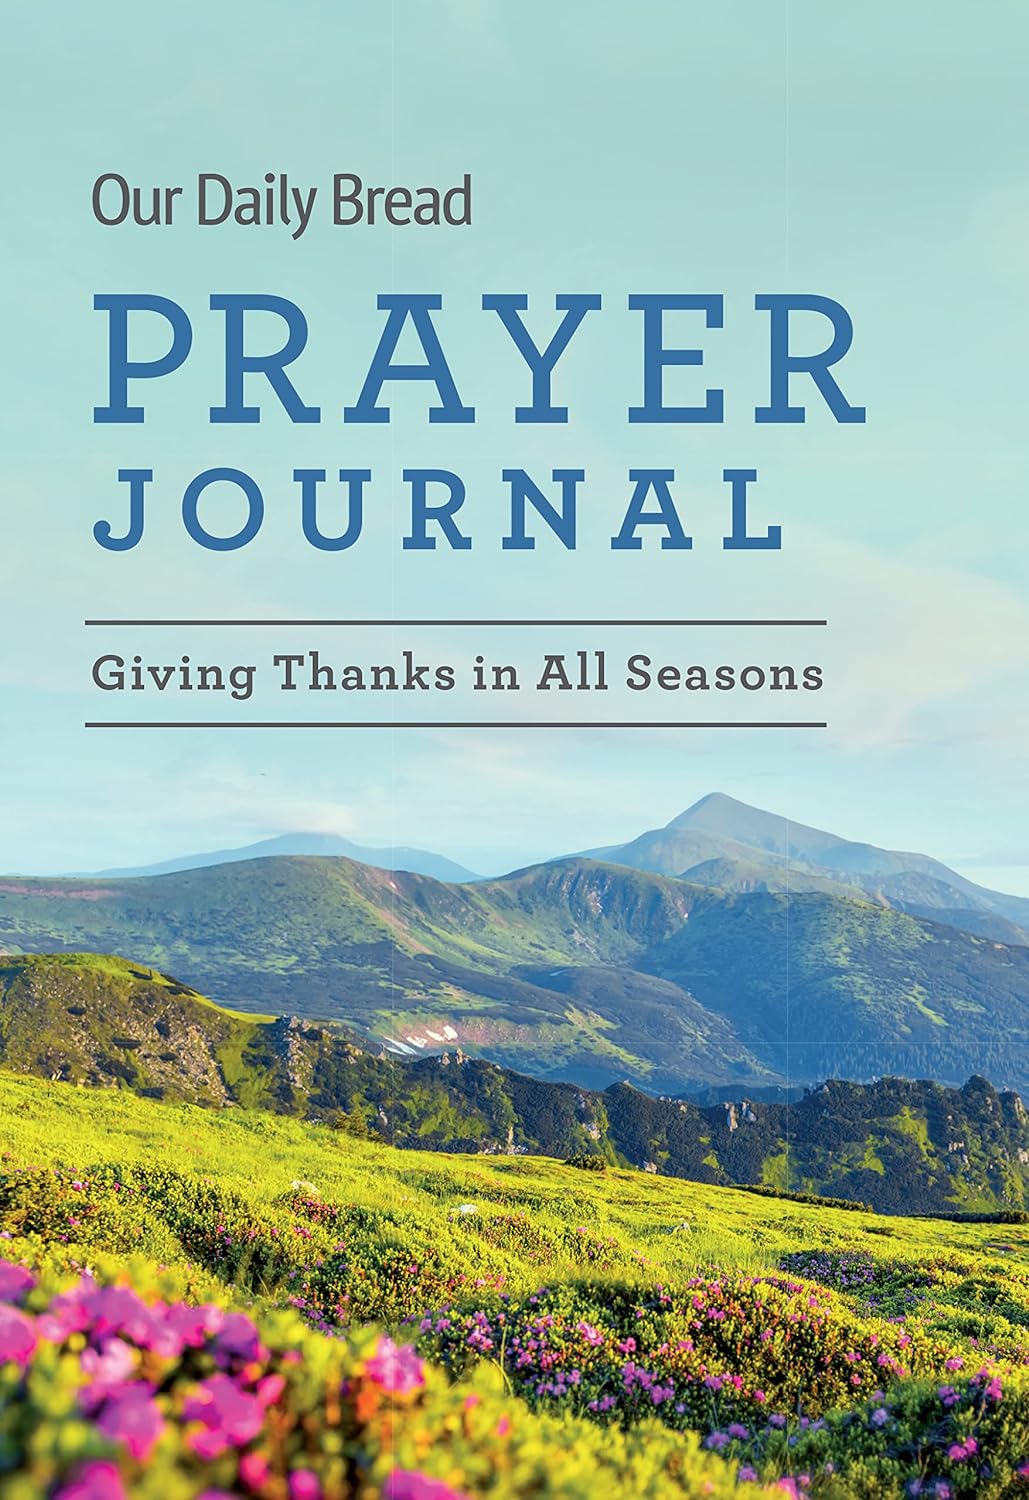 Our Daily Bread Prayer Journal : Giving Thanks in All Seasons - Hardcover